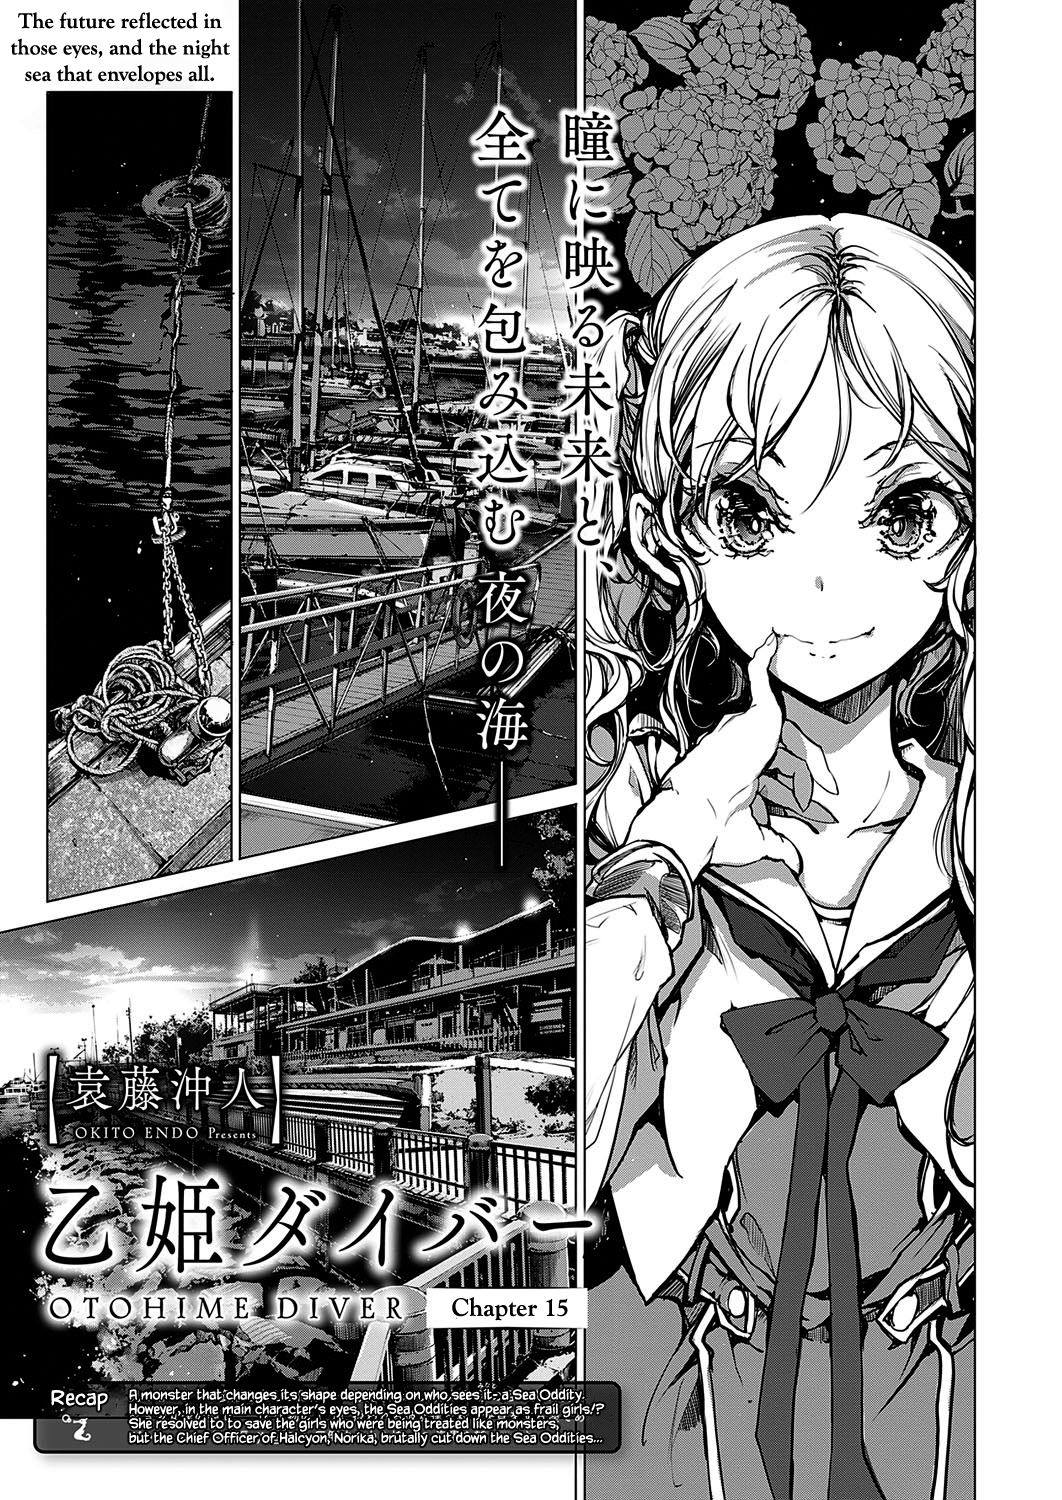 Otohime Diver Vol.2 Chapter 15 - Picture 1